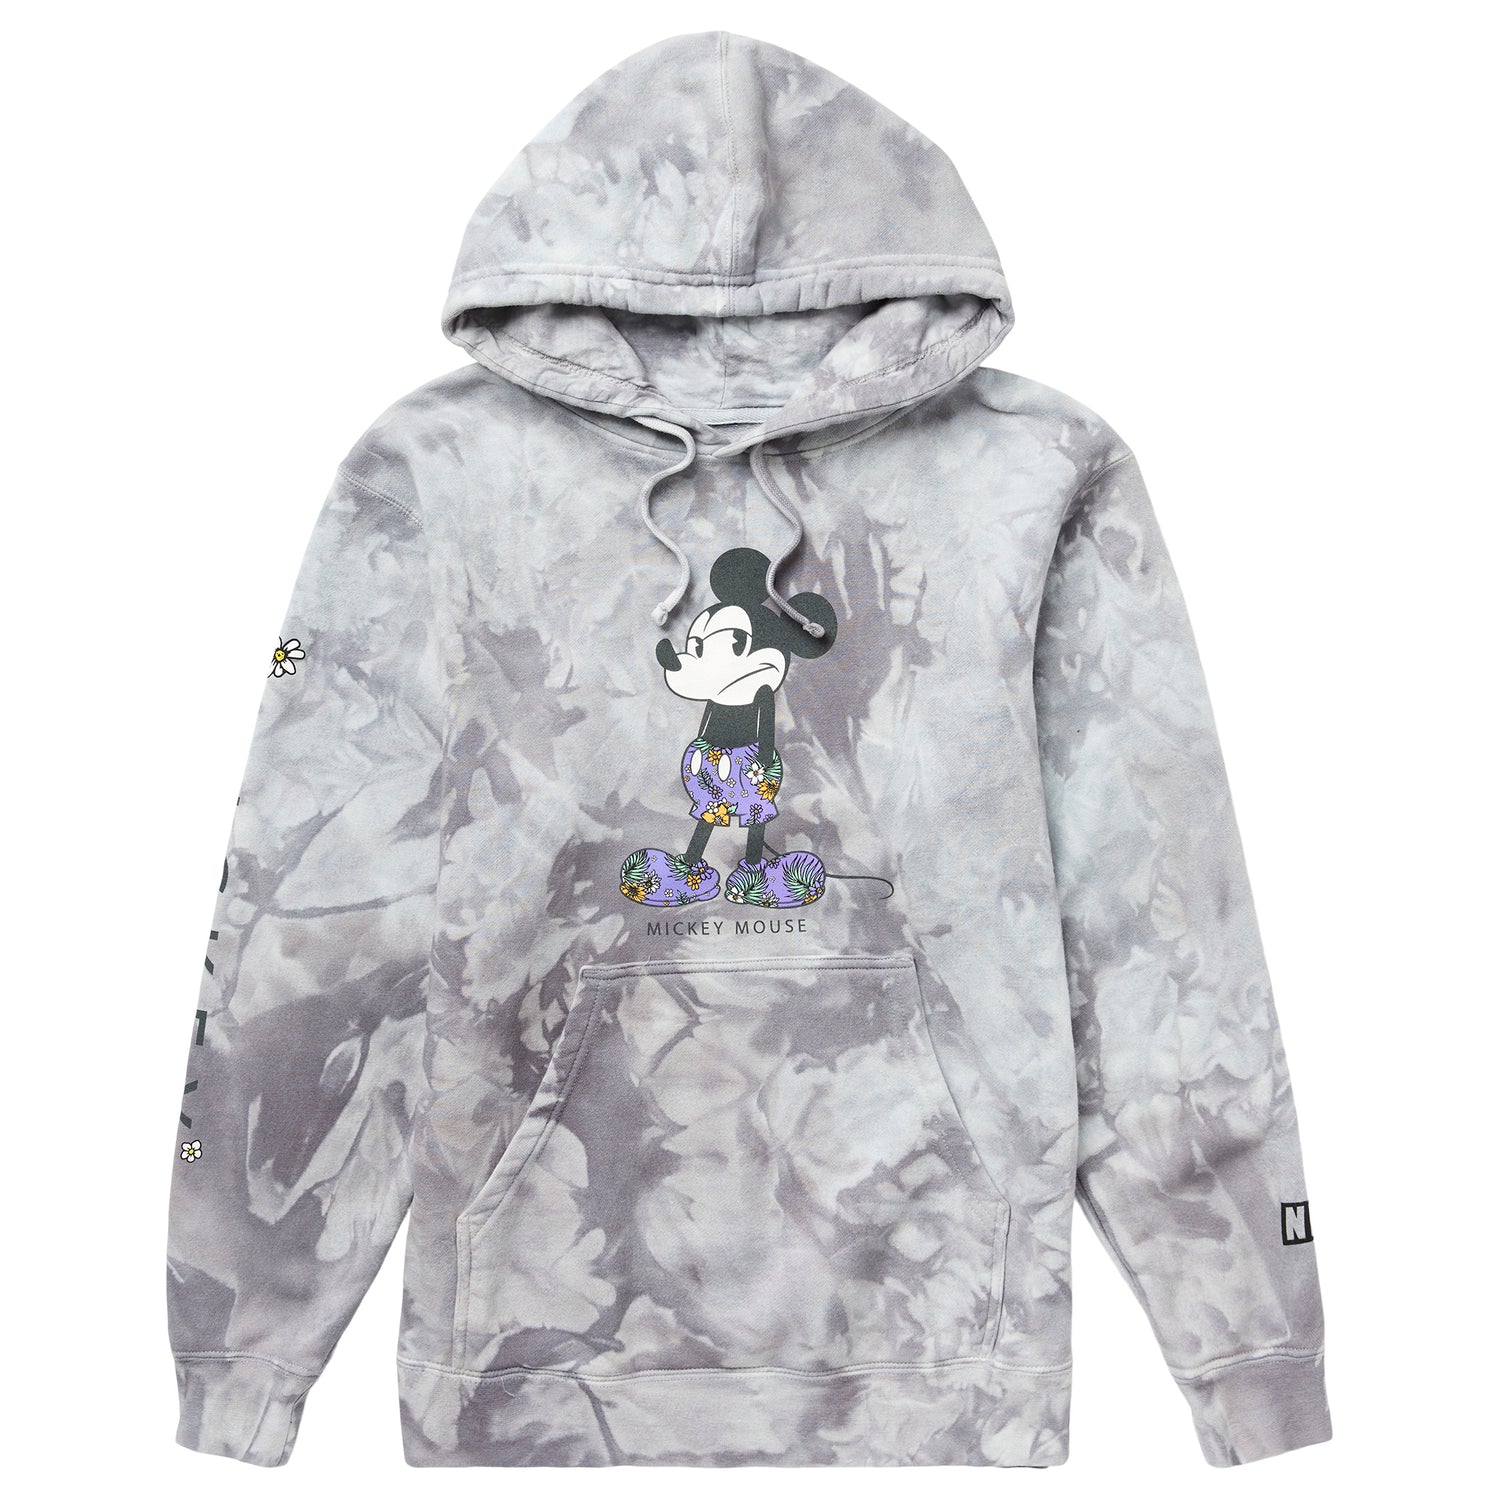 MICKEY MOUSE STIGMA PULLOVER HOODIE - GREY TIE DYE